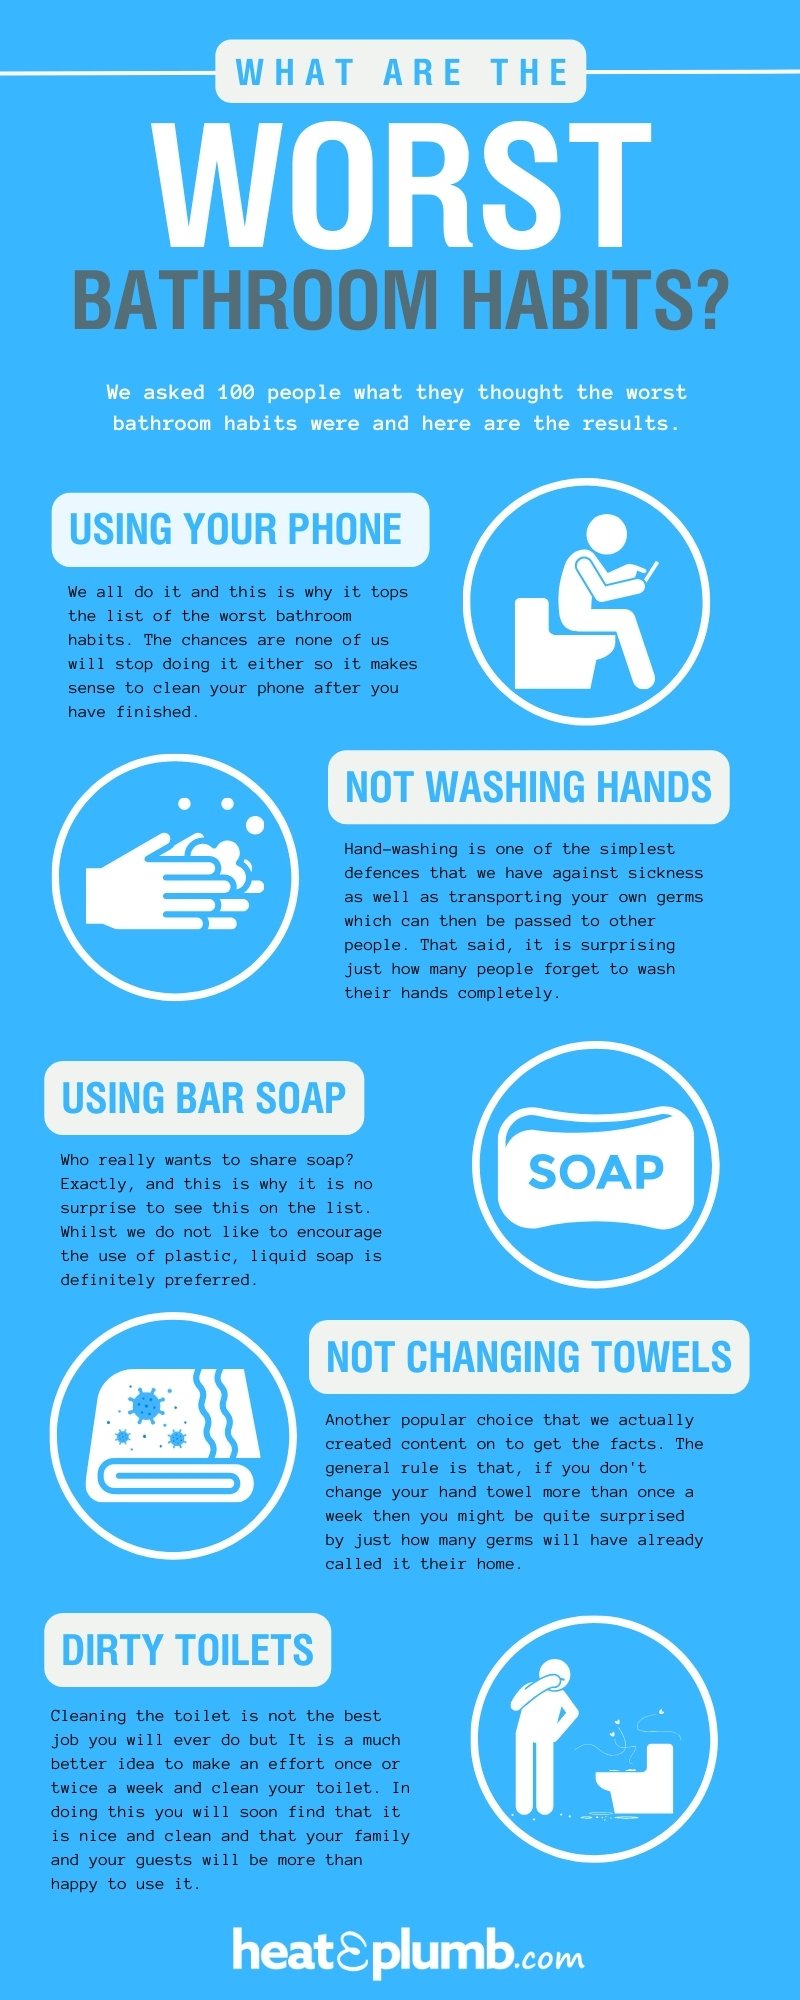 What are the Worst Bathroom Habits? - Infographic